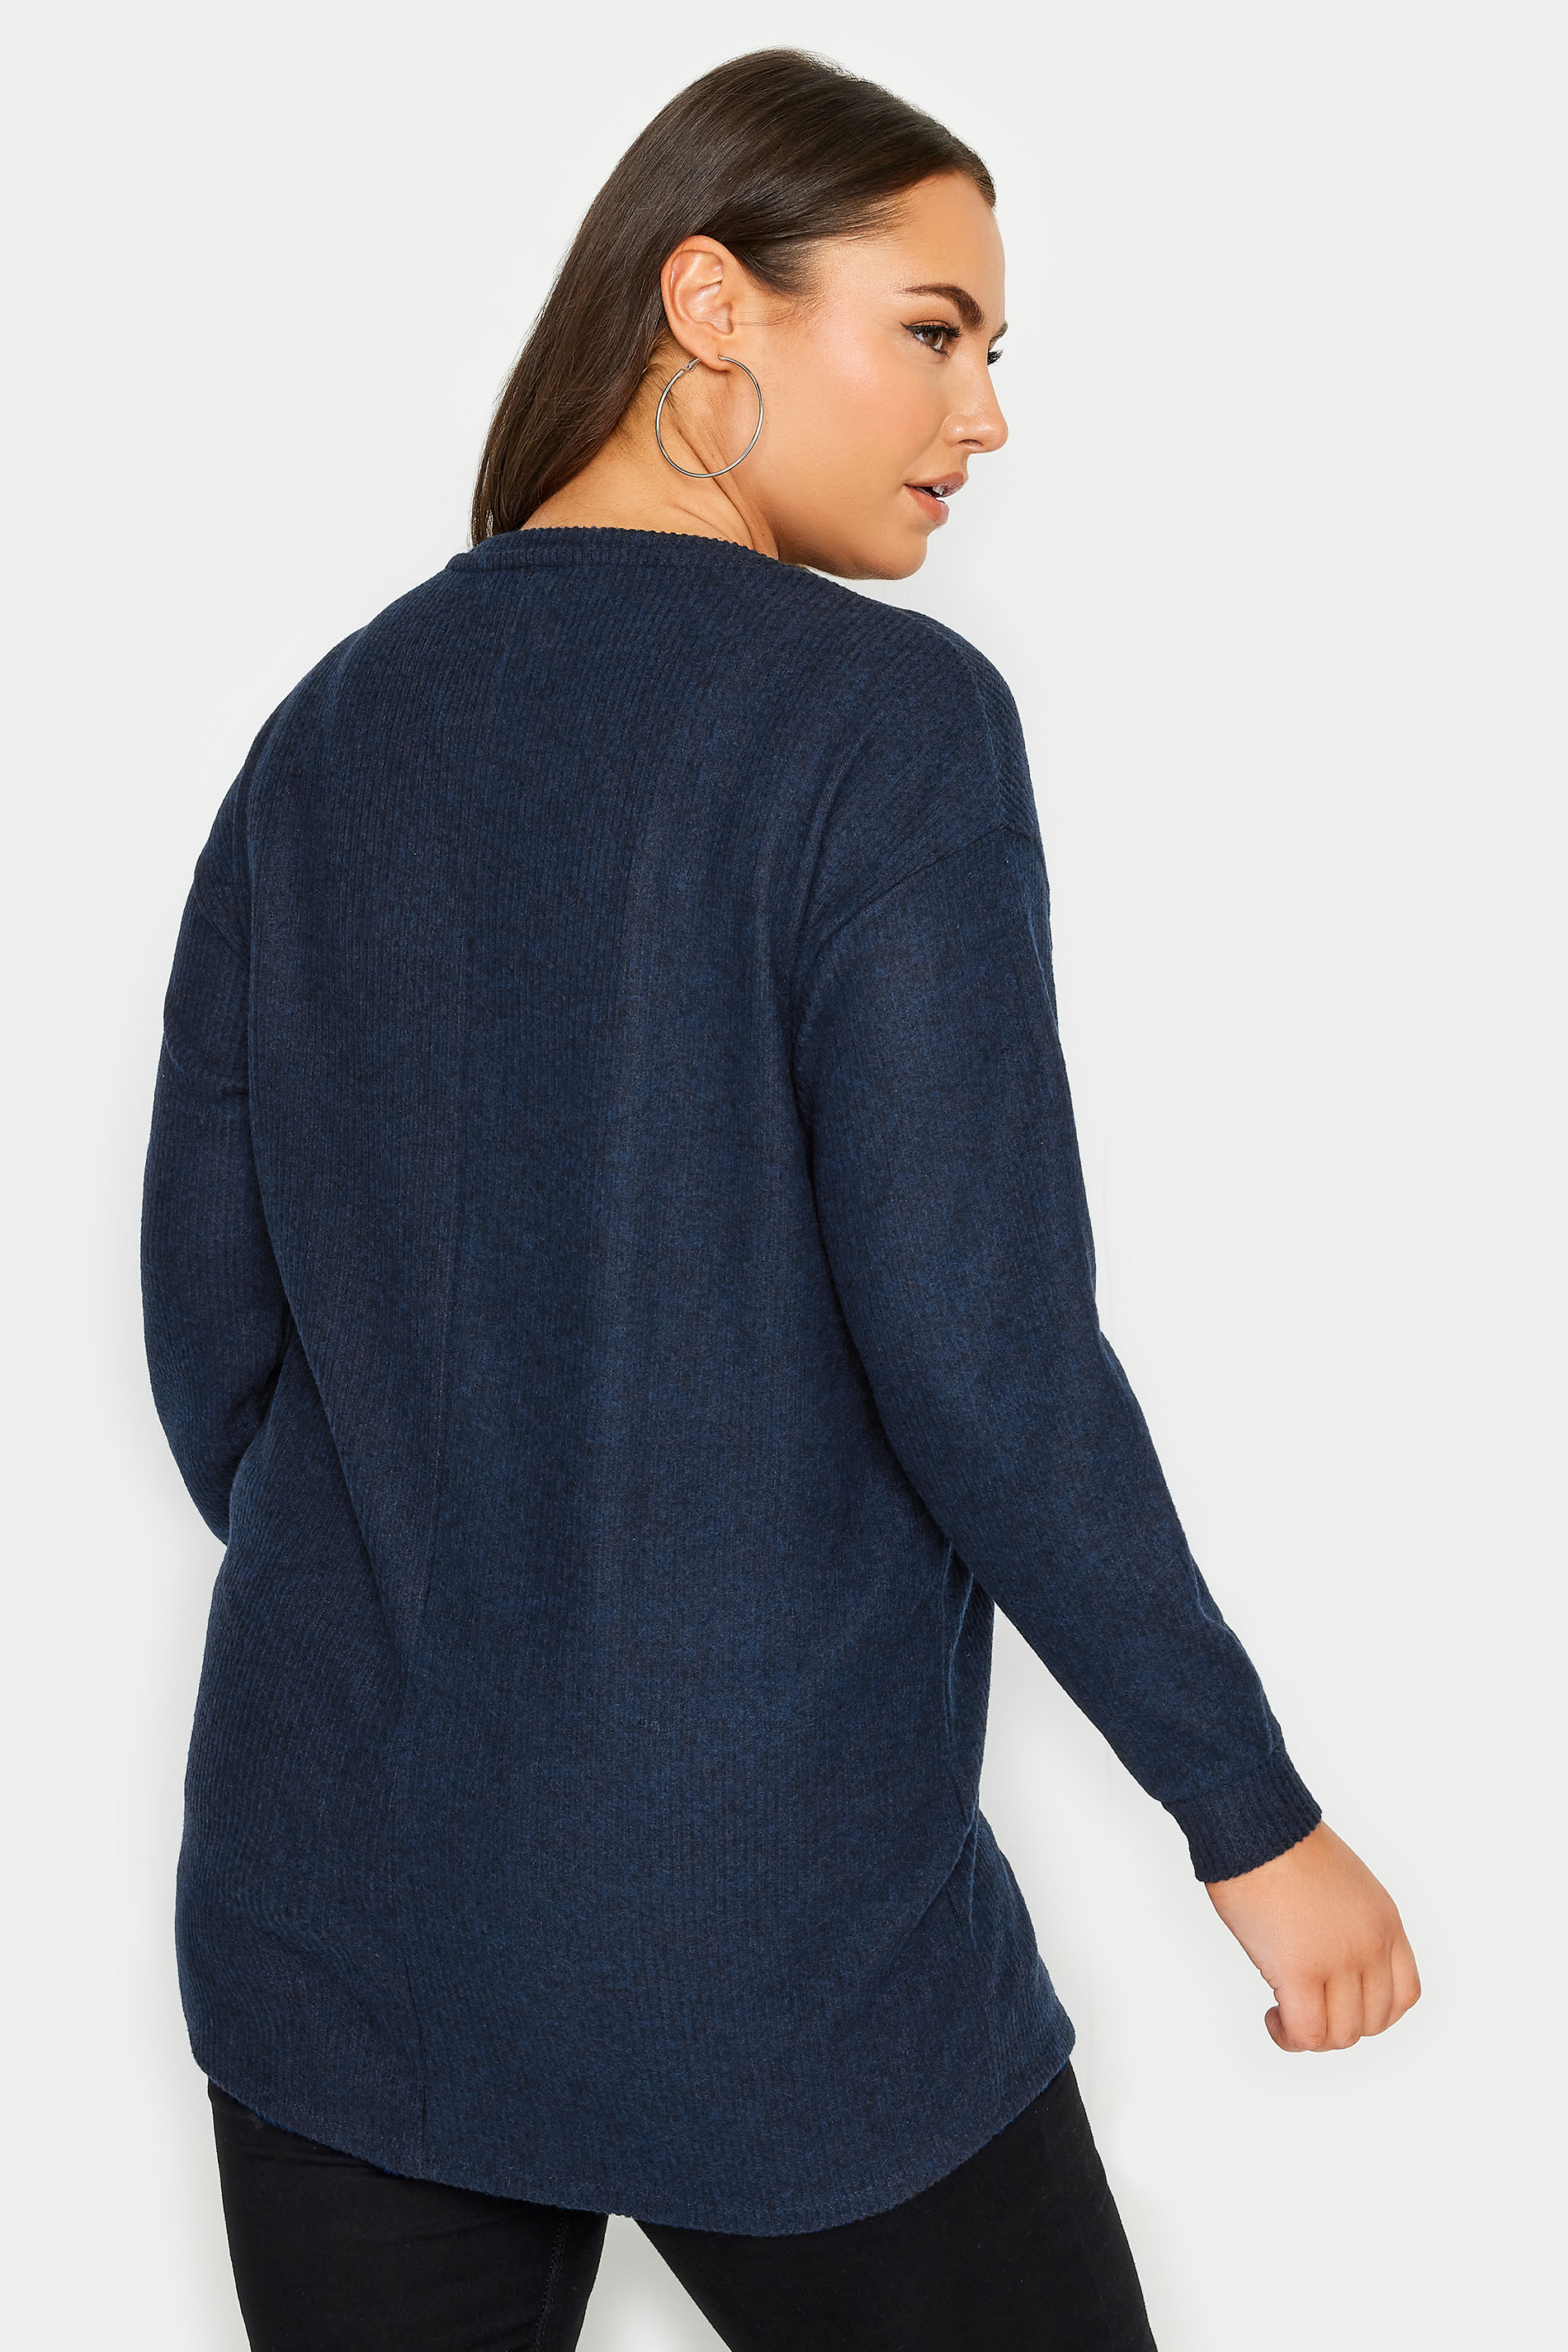 YOURS LUXURY Plus Size Blue Star Sequin Sweatshirt | Yours Clothing 3